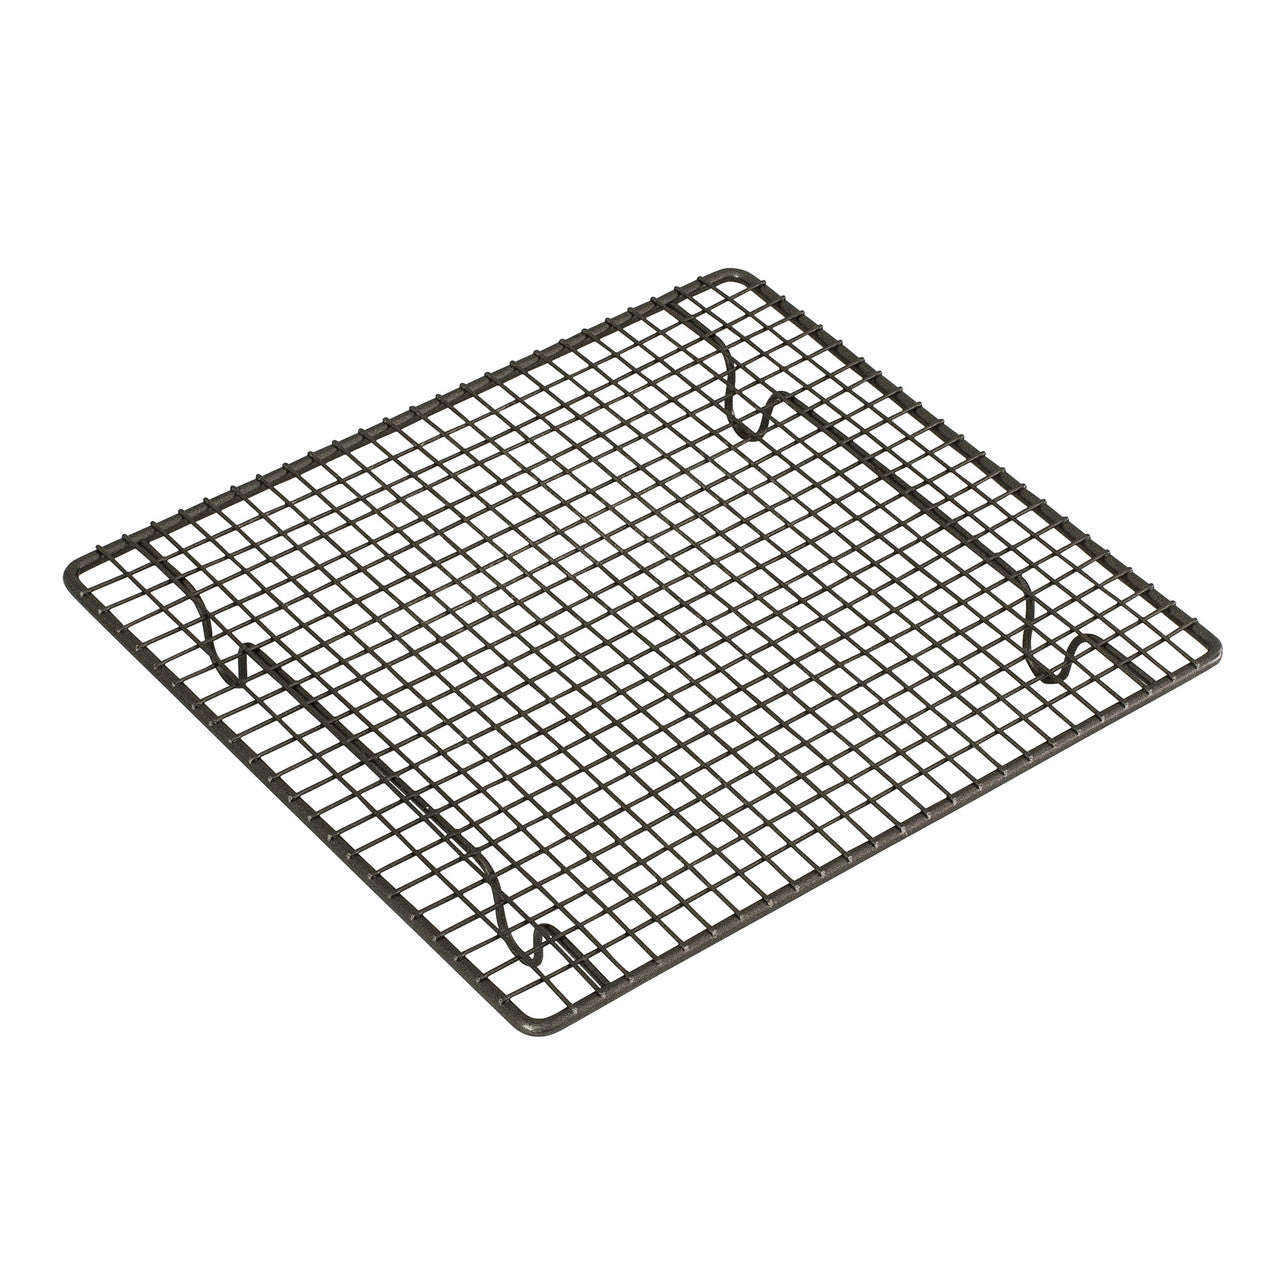 B/Master Cooling Tray, 25 x 23cm